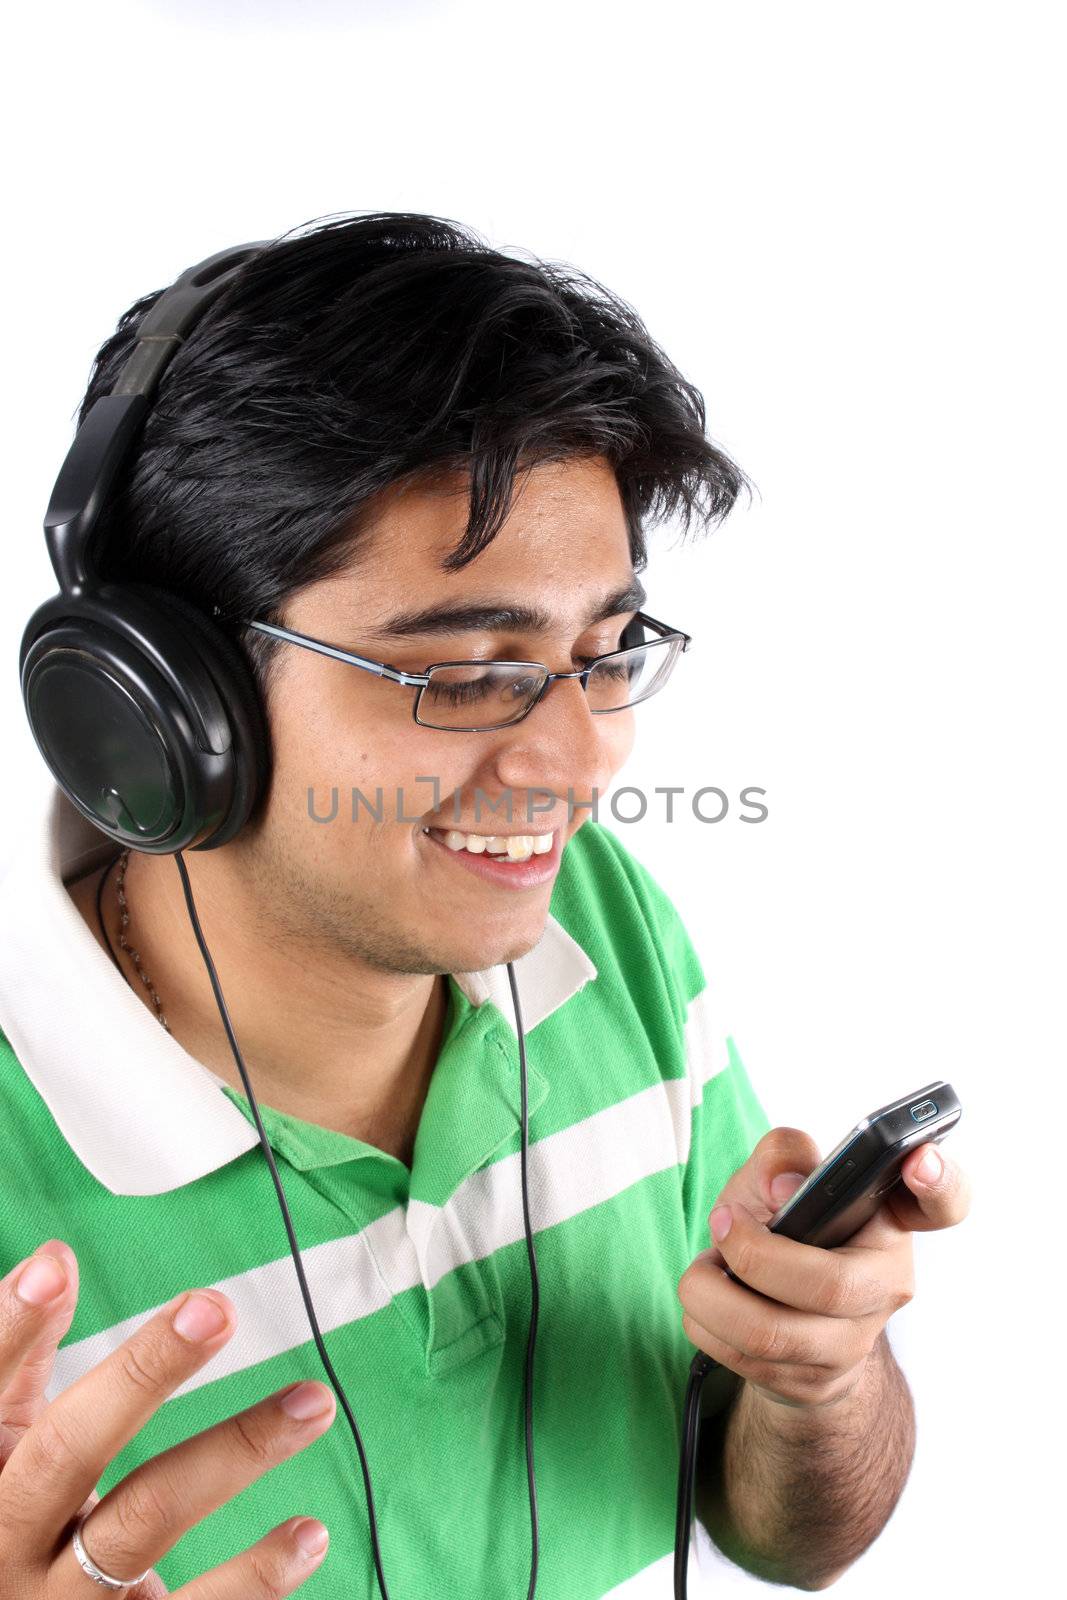 An Indian teenager listening to music on his headphones and a MP3 cellphone, on white studio background.